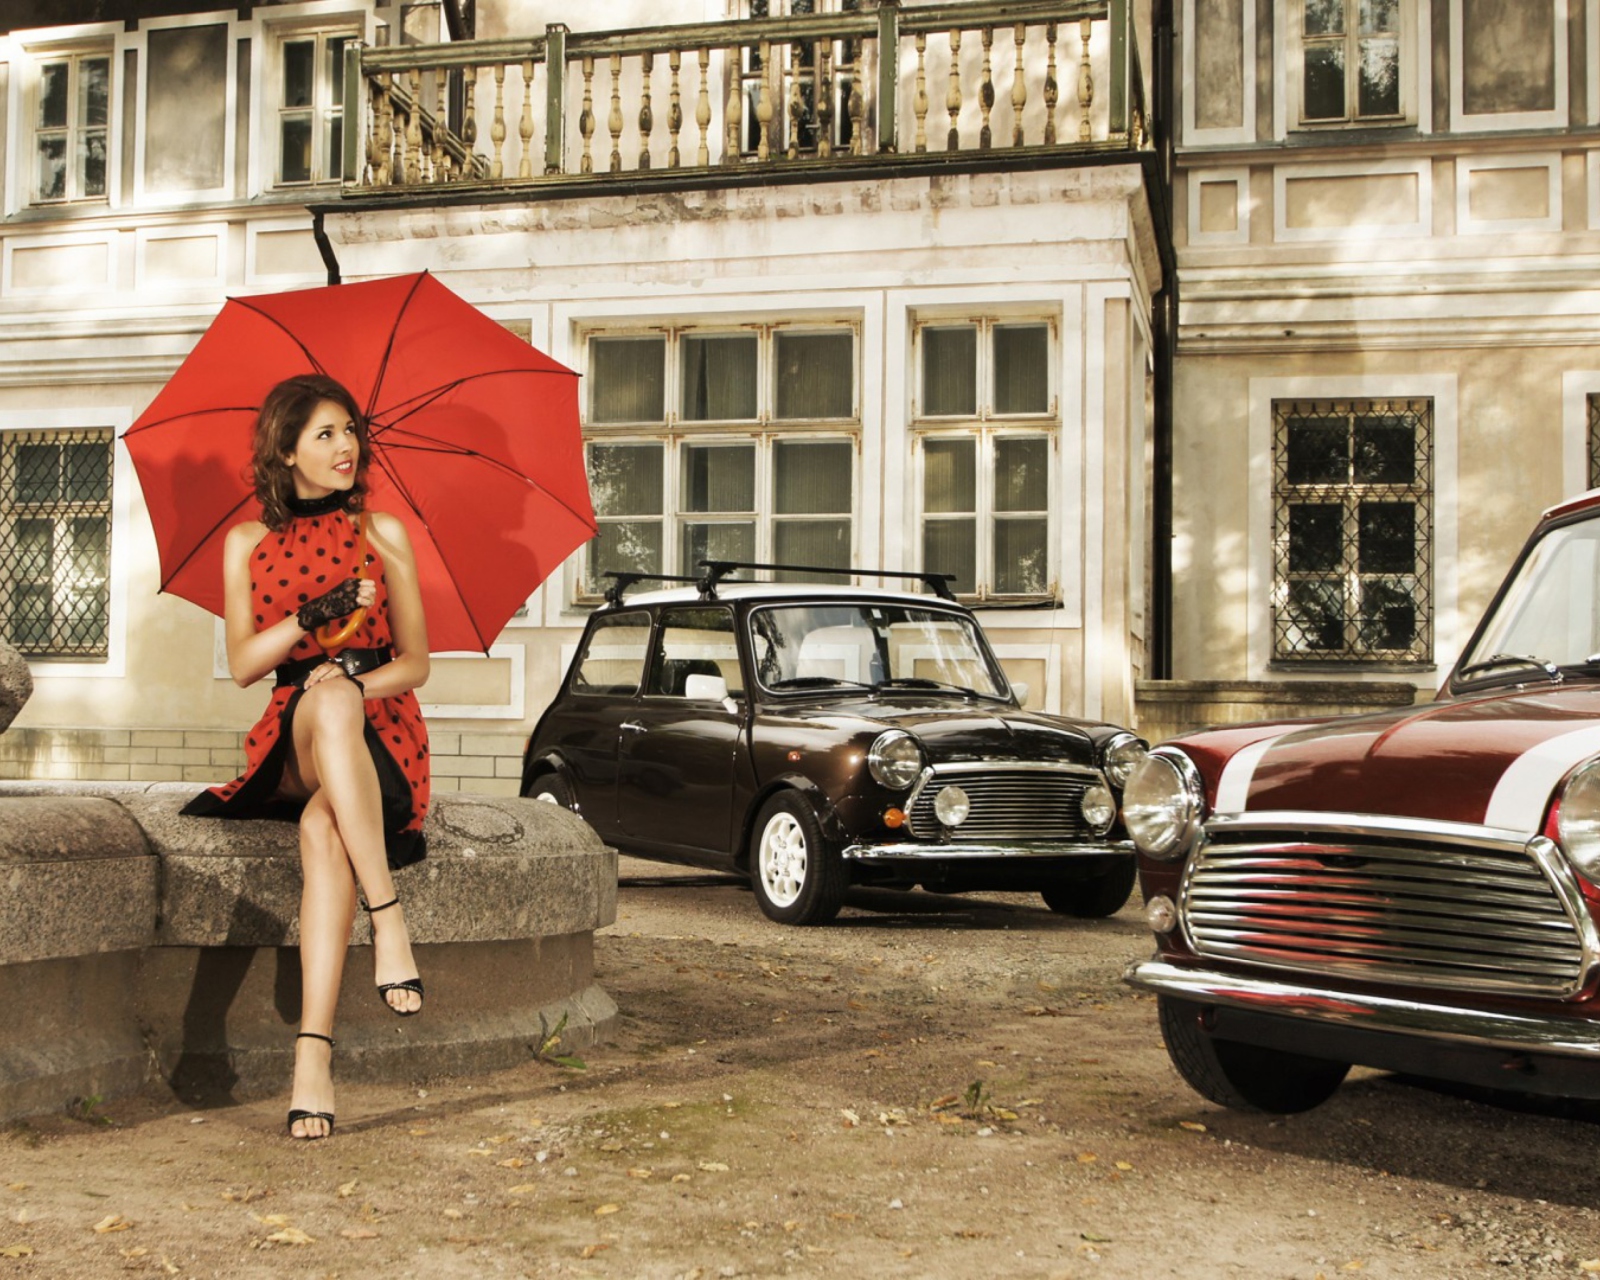 Girl With Red Umbrella And Vintage Mini Cooper screenshot #1 1600x1280